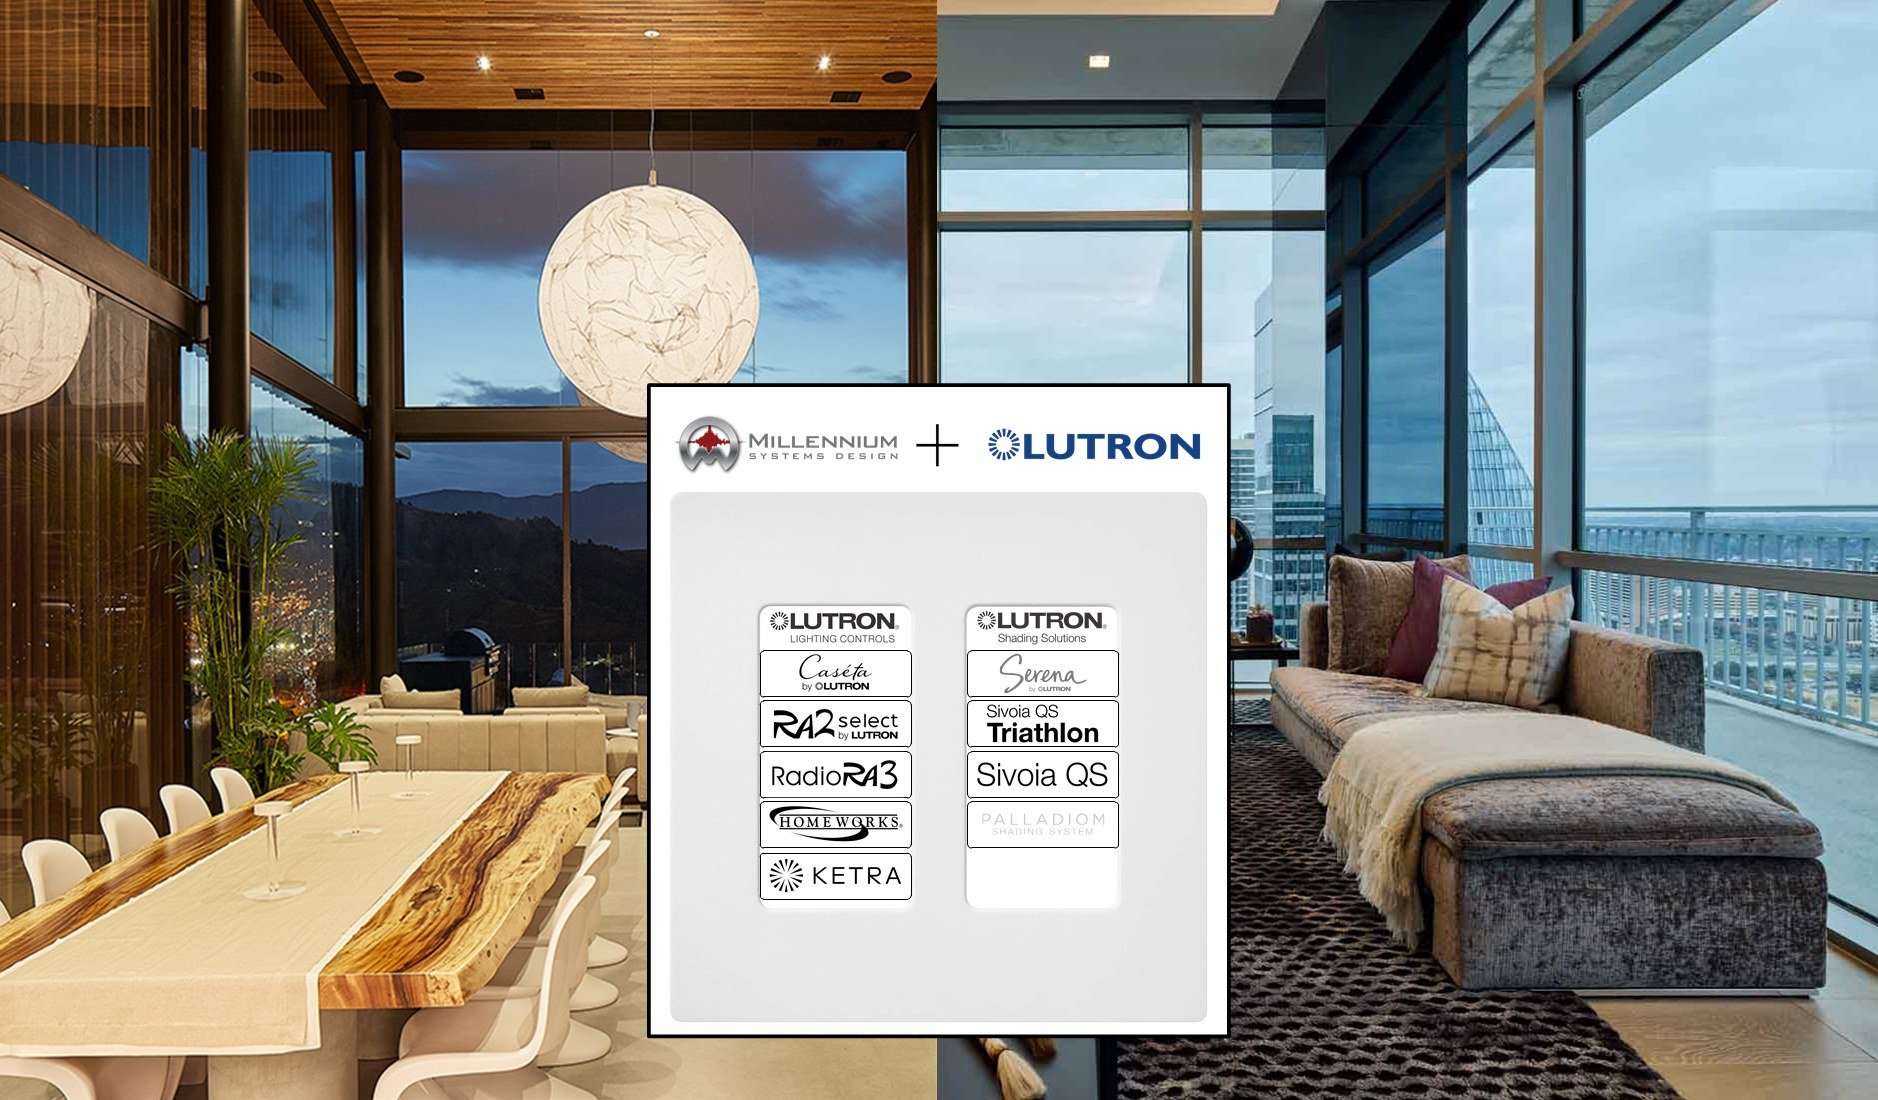 Exciting news! We're now fully certified in all of Lutron's cutting-edge lighting and shading solutions! Our MSD team has dedicated months of hard work to partner with one of the most sought-after brands in the industry.

For nearly half a century, L